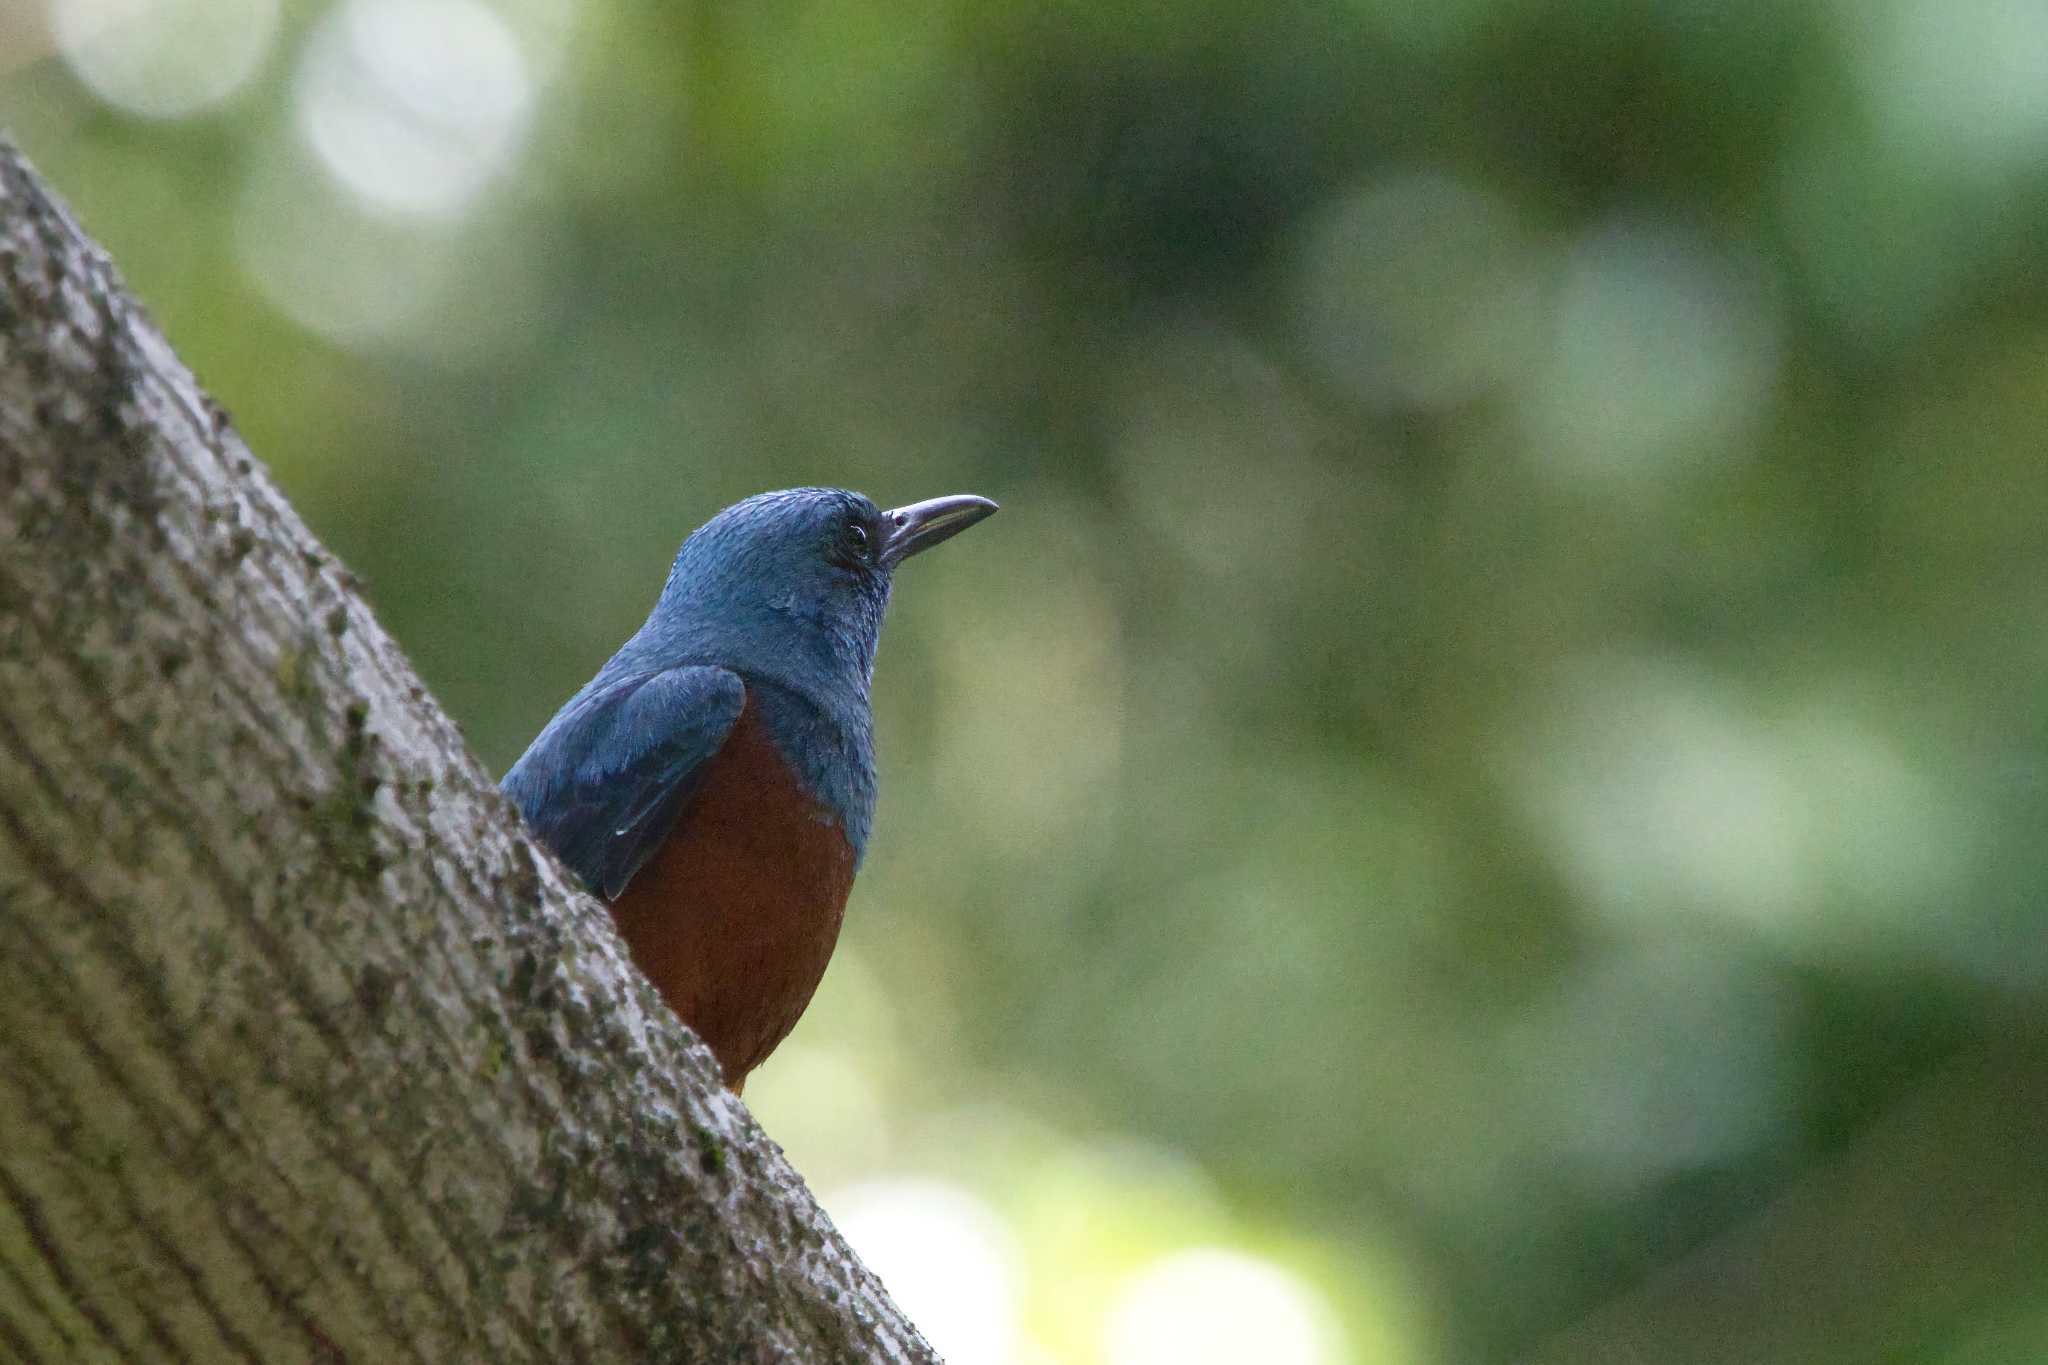 Photo of Blue Rock Thrush at 和歌山城公園 by アカウント15049